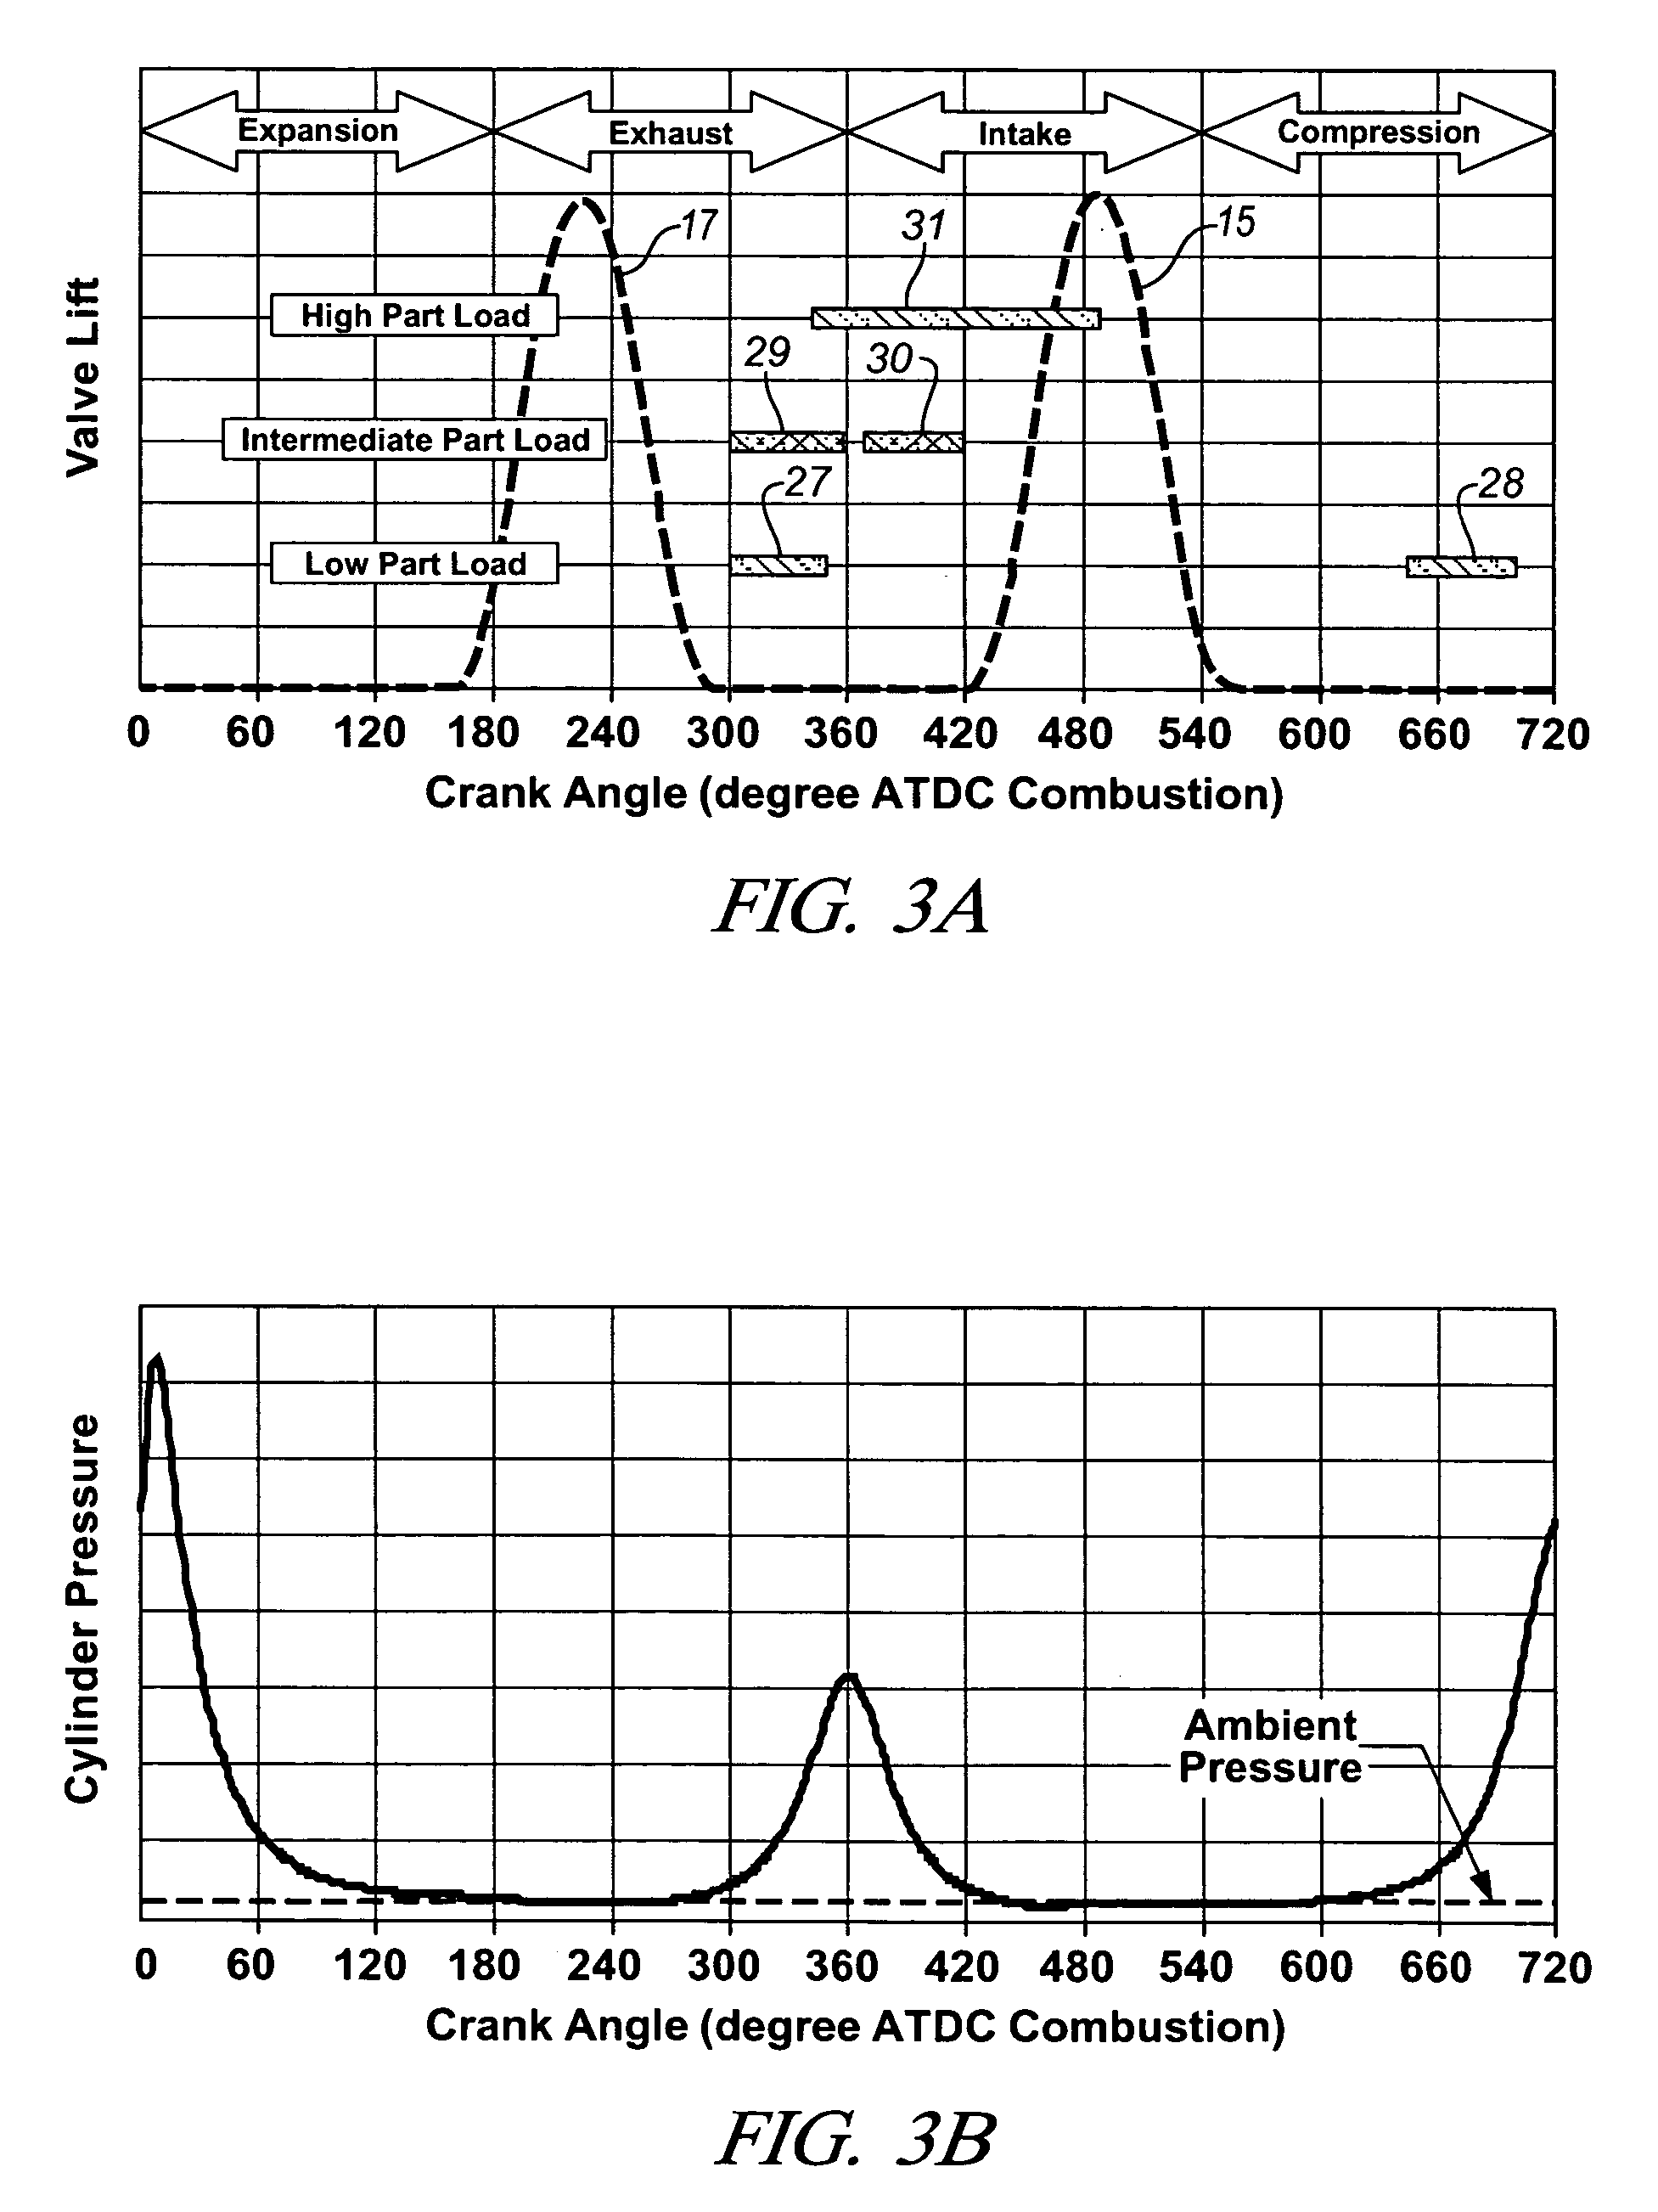 Load transient control methods for direct-injection engines with controlled auto-ignition combustion